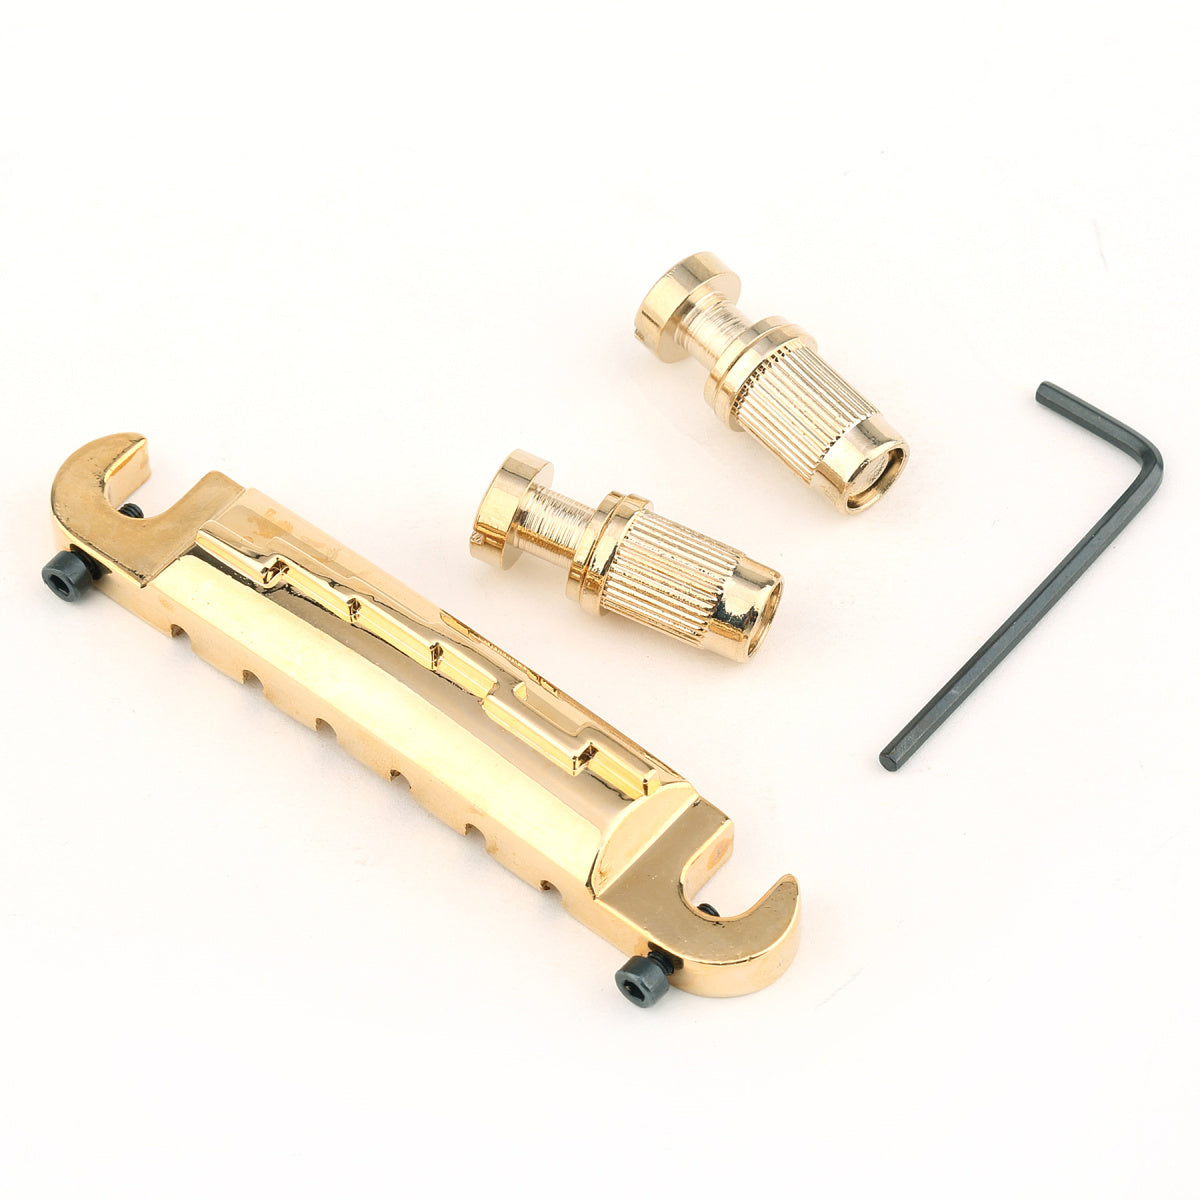 Musiclily 6 String Compensated Wraparound Stud Mount Adjustable Bridge for Les Paul Style Guitar, Gold